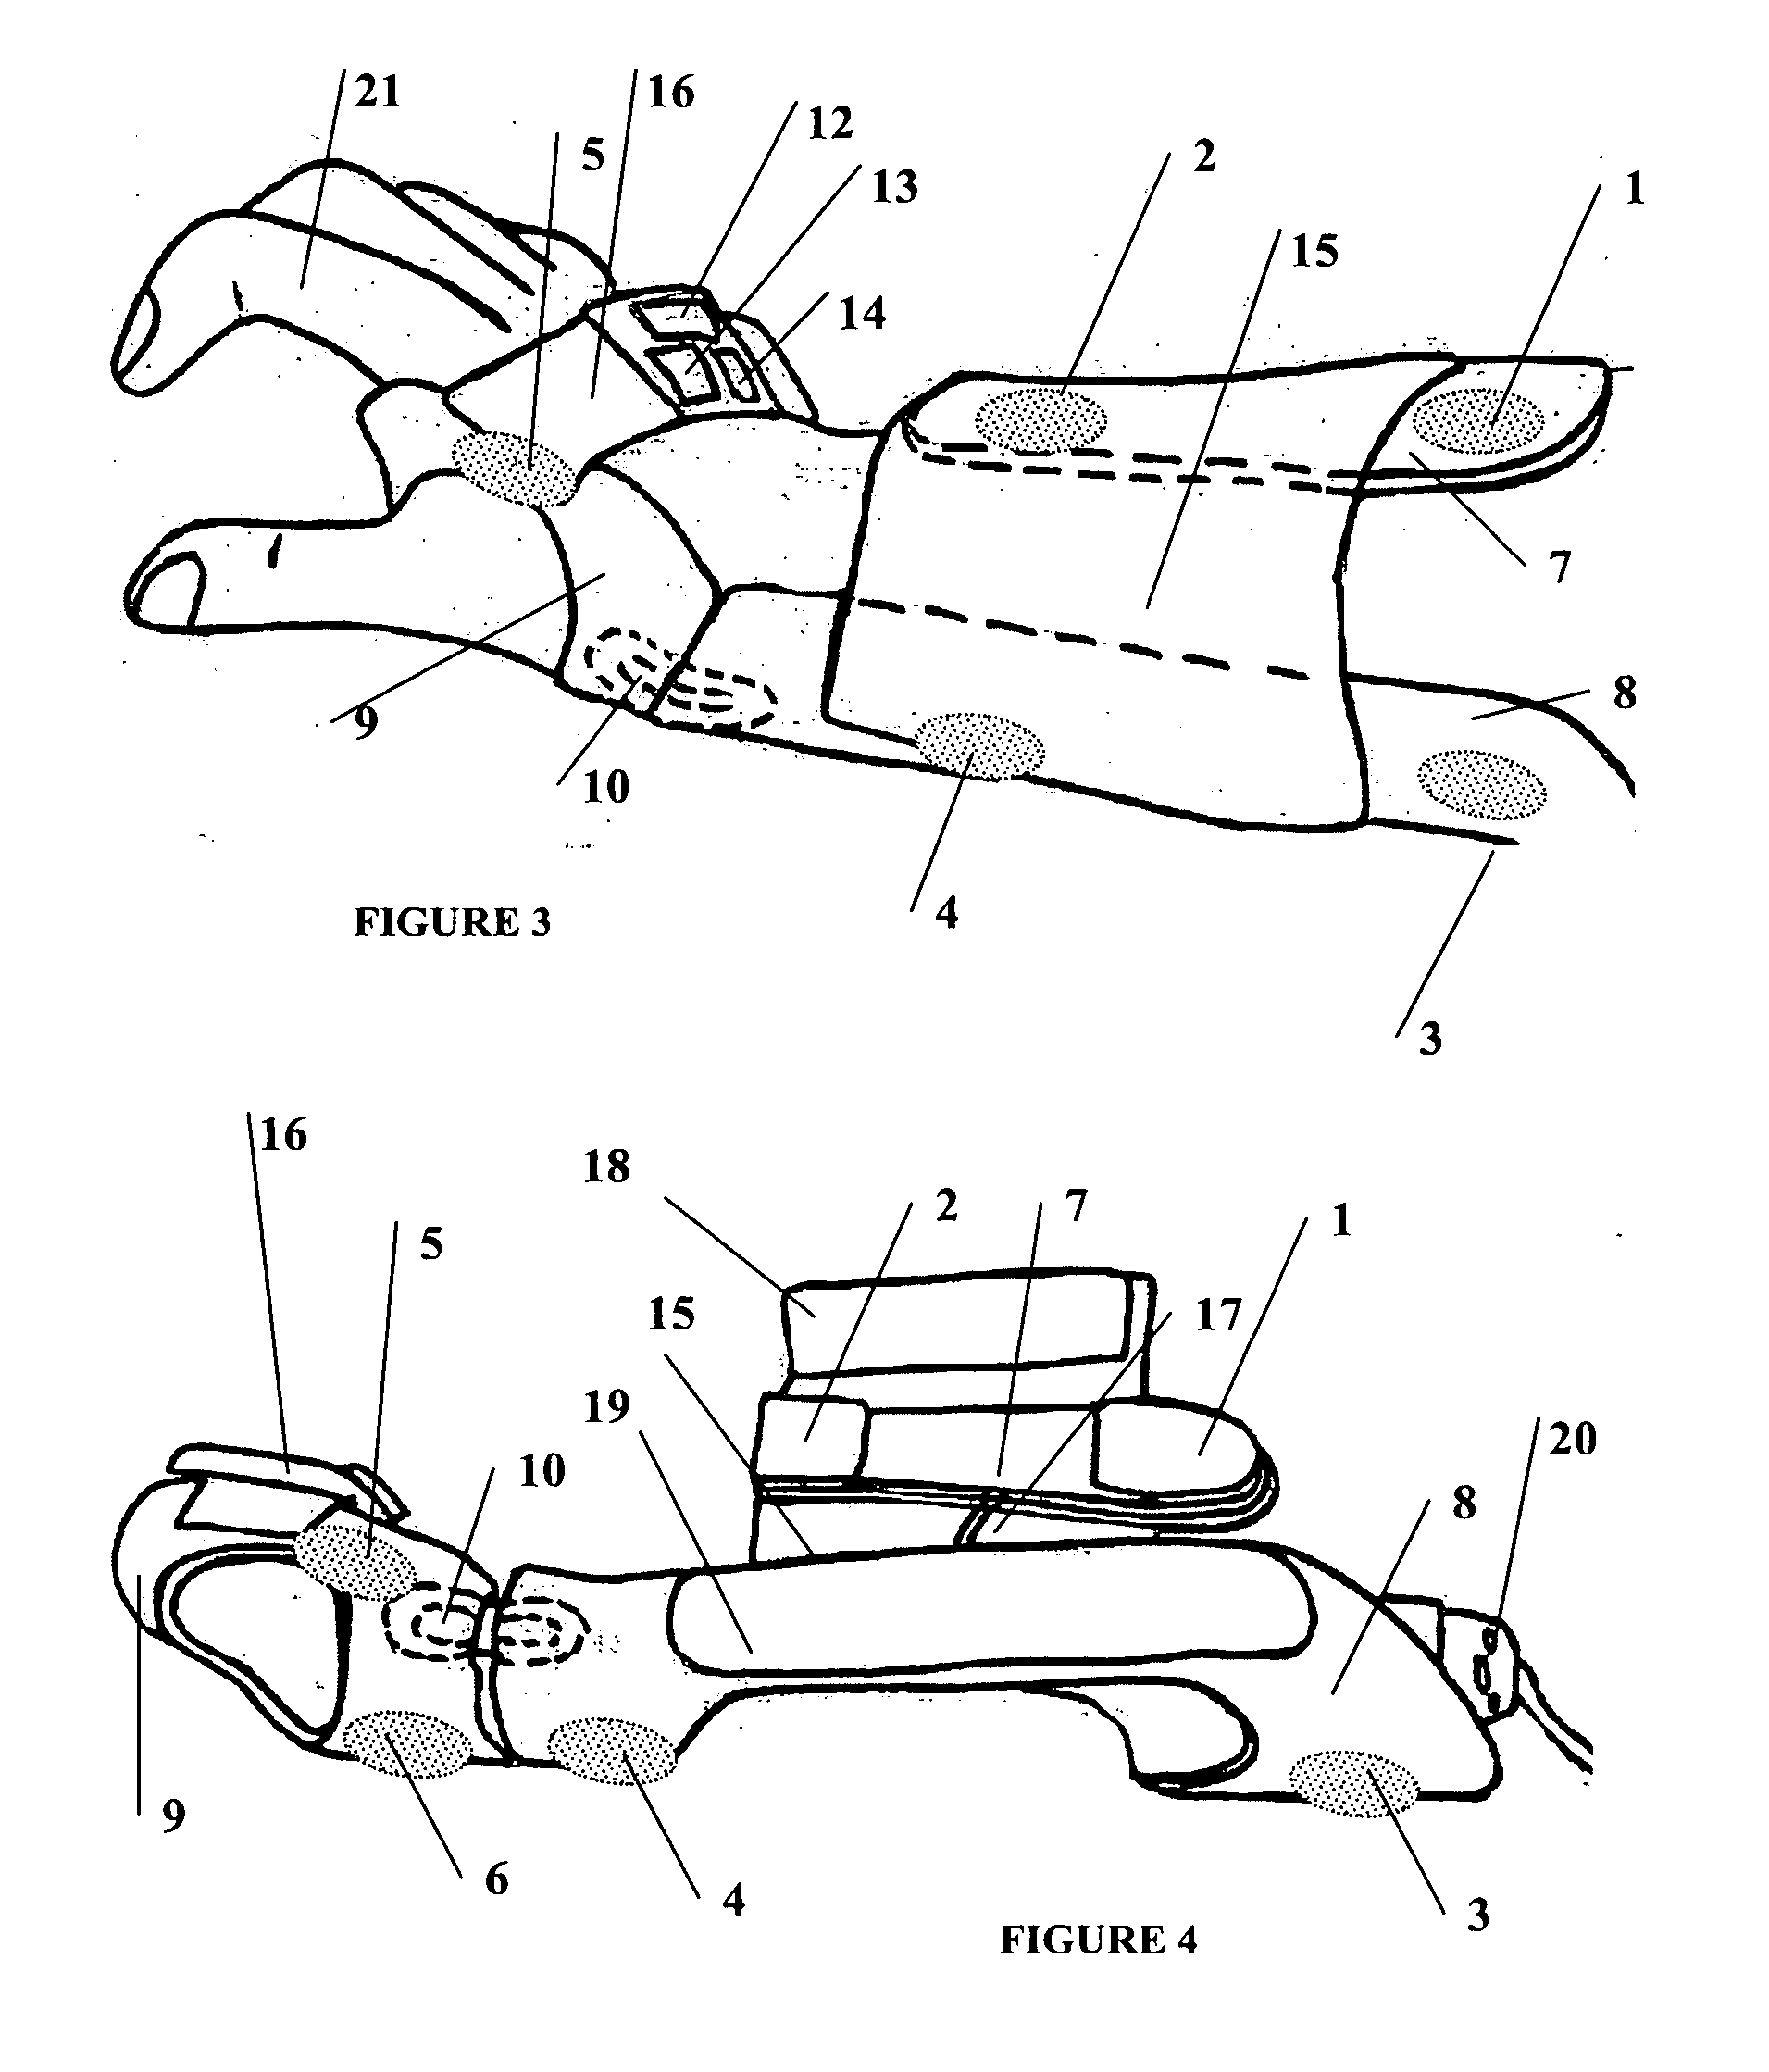 Functional electrical stimulation system